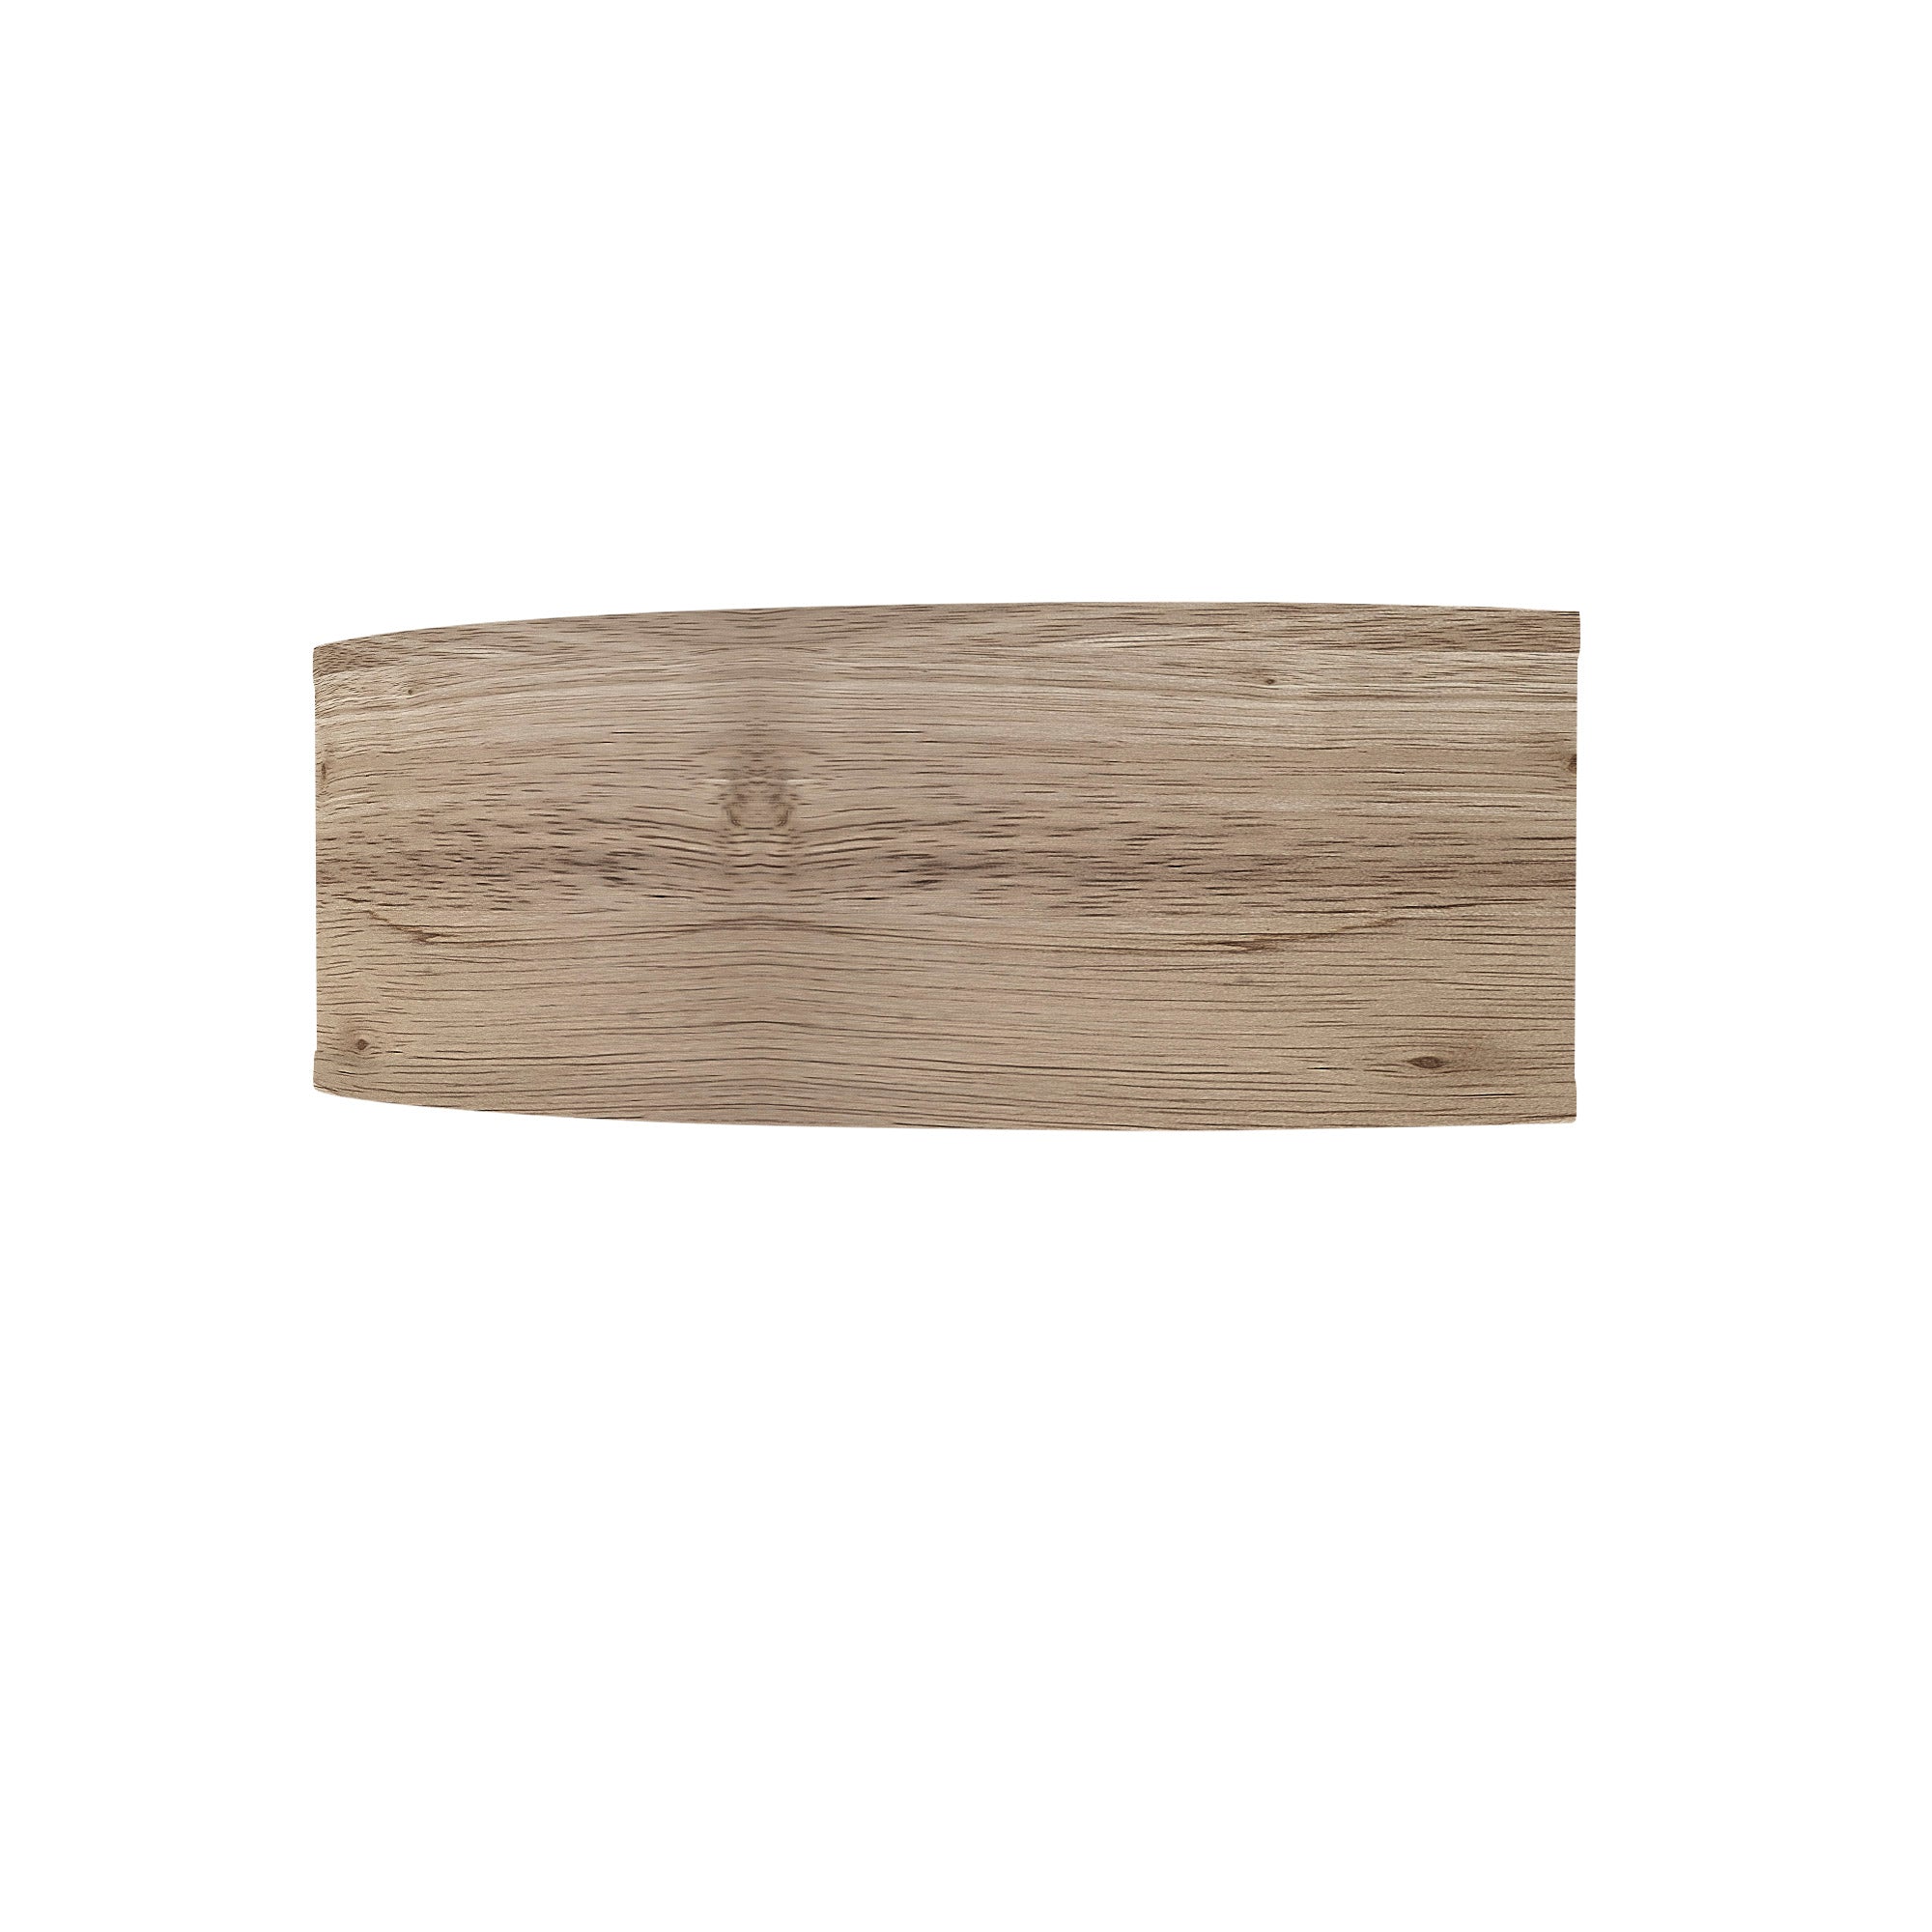 The Mora Wall Sconce from Seascape Fixtures with a photo veneer shade in natural color.